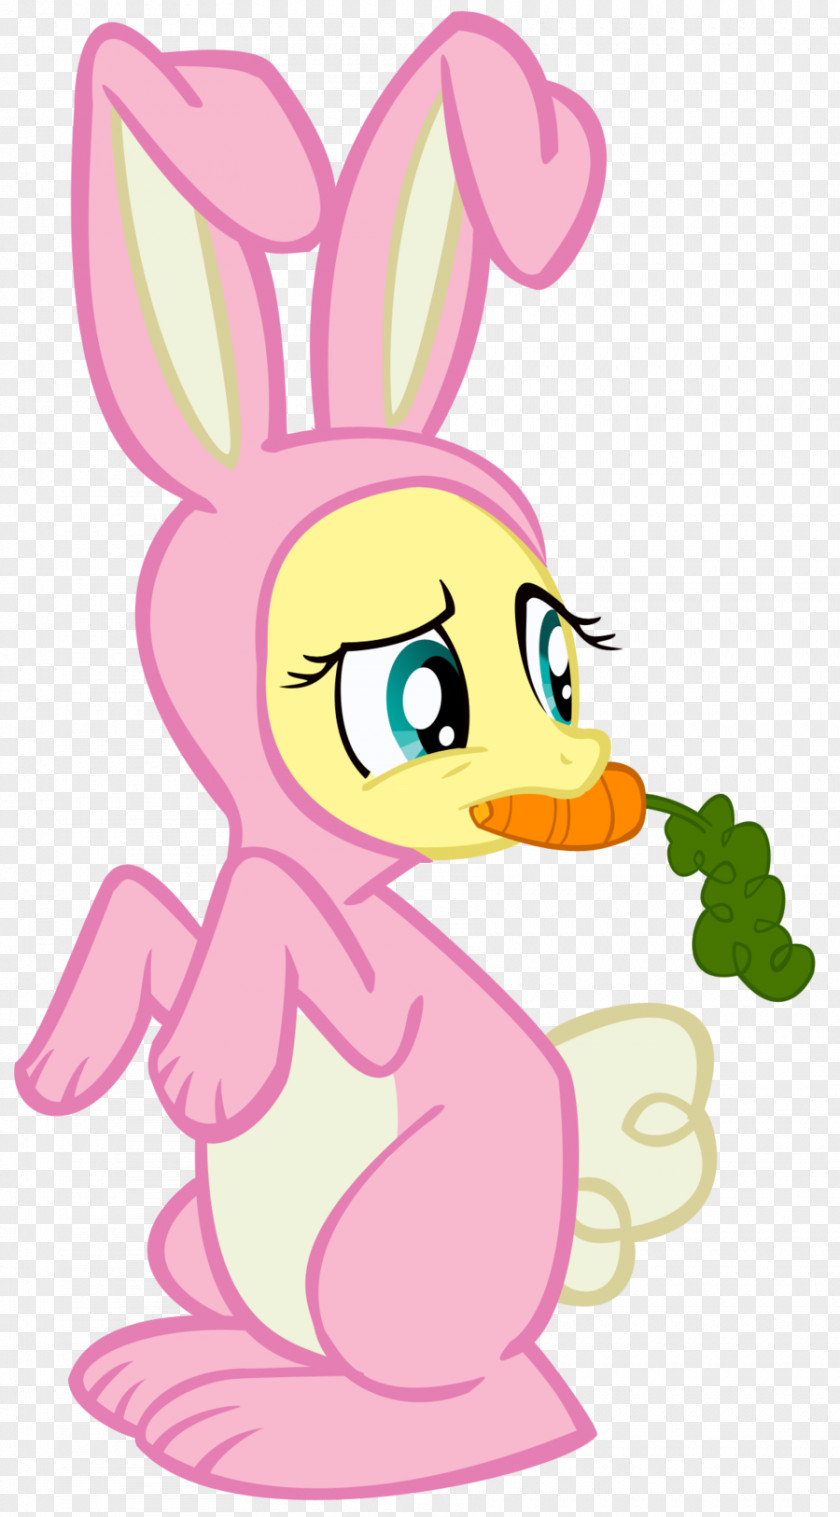 Bunny Fluttershy Pony Pinkie Pie Rainbow Dash Easter PNG